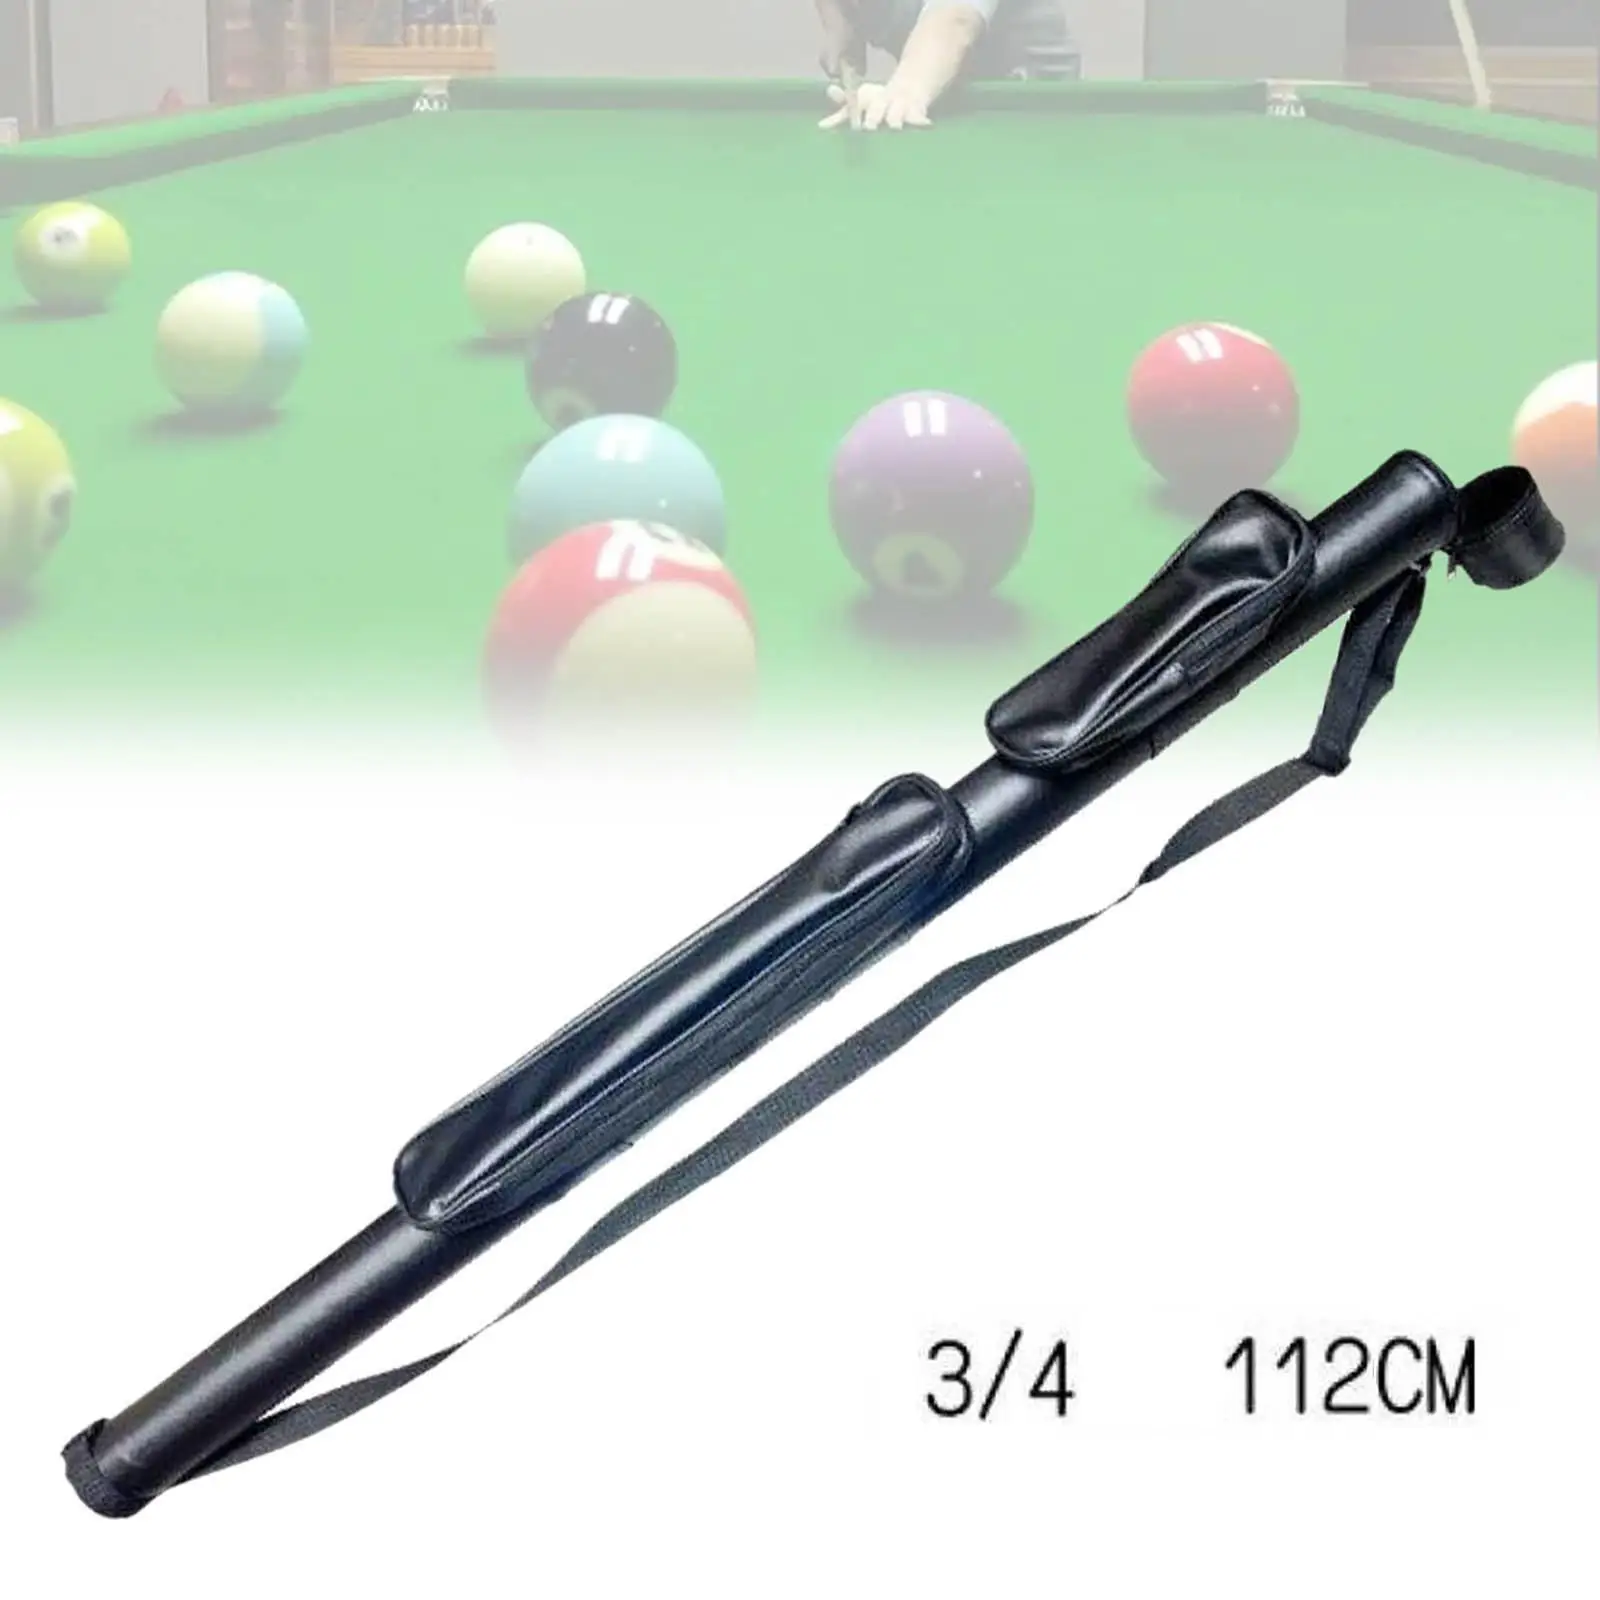 Billiards Pool Cue Case Jointed Snooker Organizer with Accessory Pouch